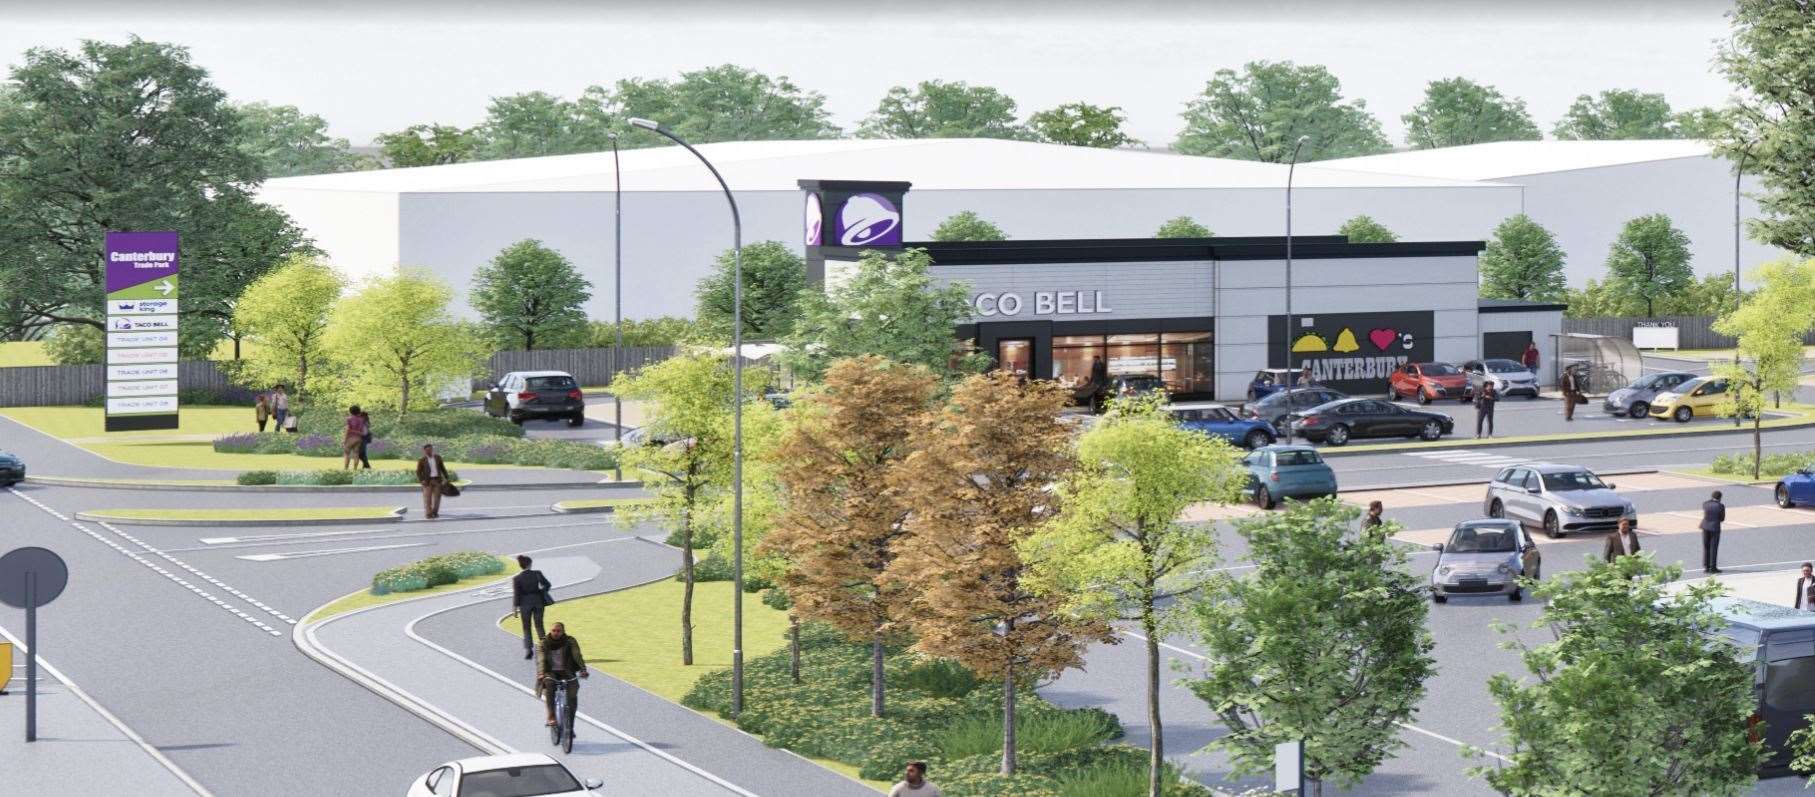 The Taco Bell planned for Sturry Road has been approved